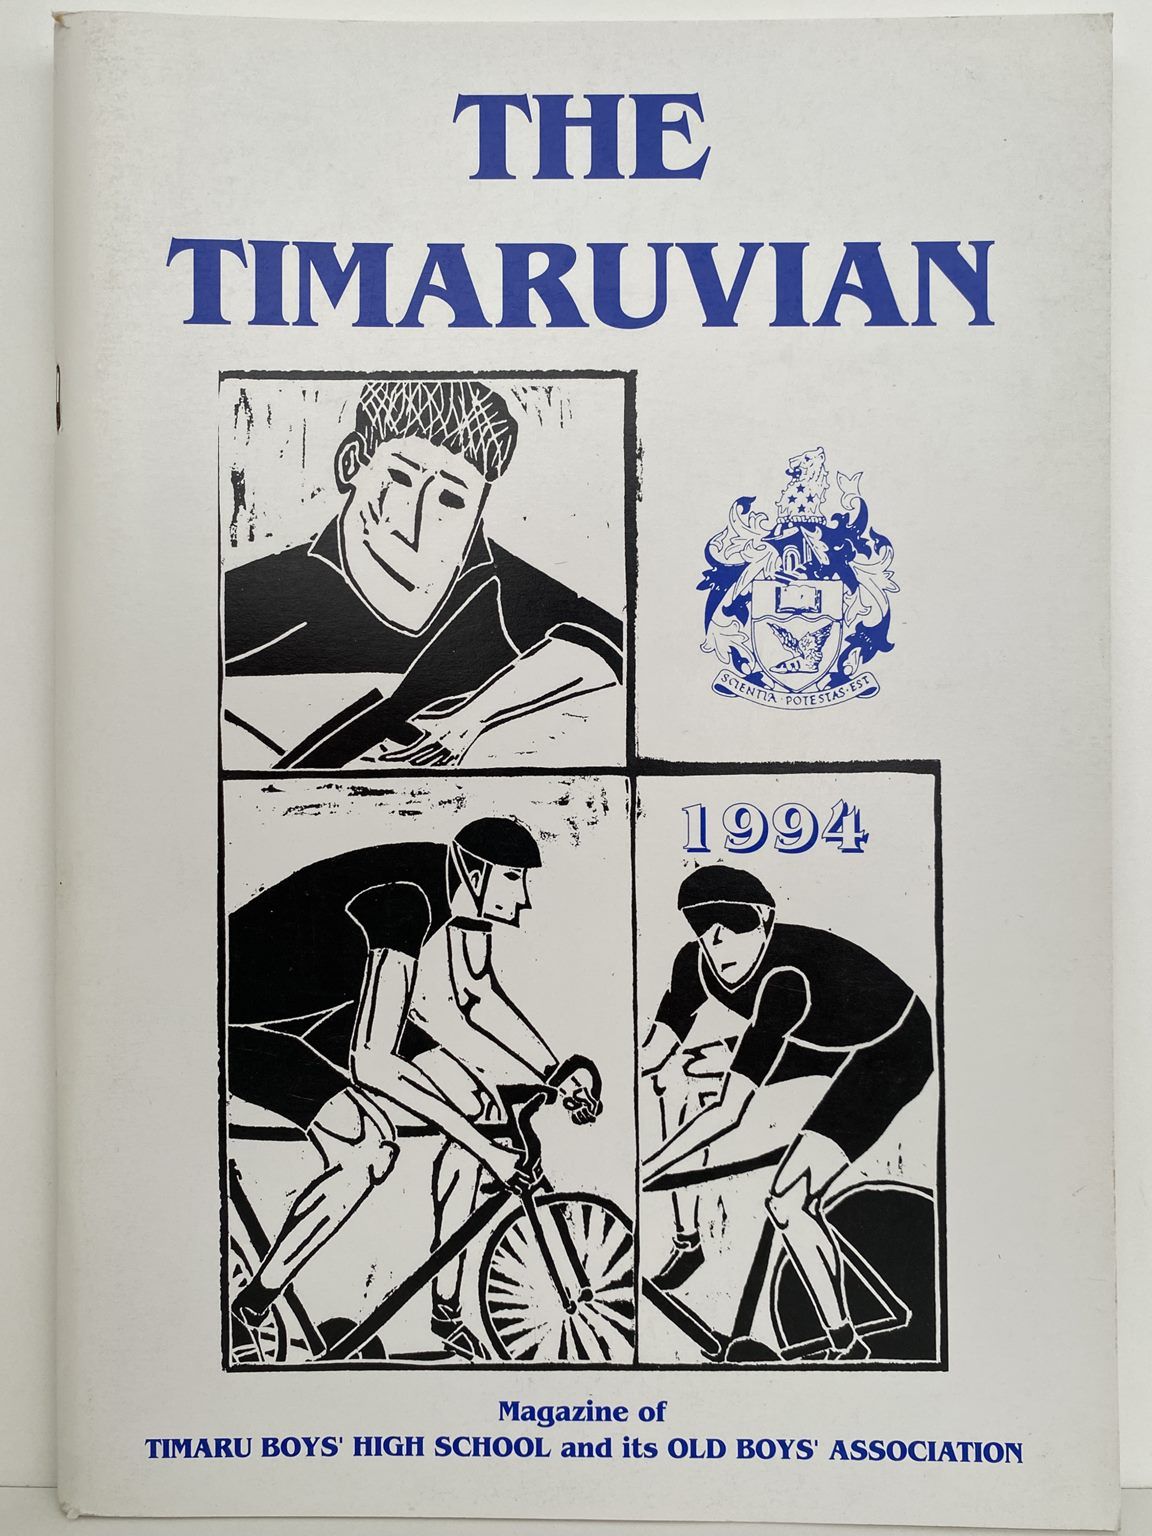 THE TIMARUVIAN: Magazine of the Timaru Boys' High School and its Old Boys' Association 1994